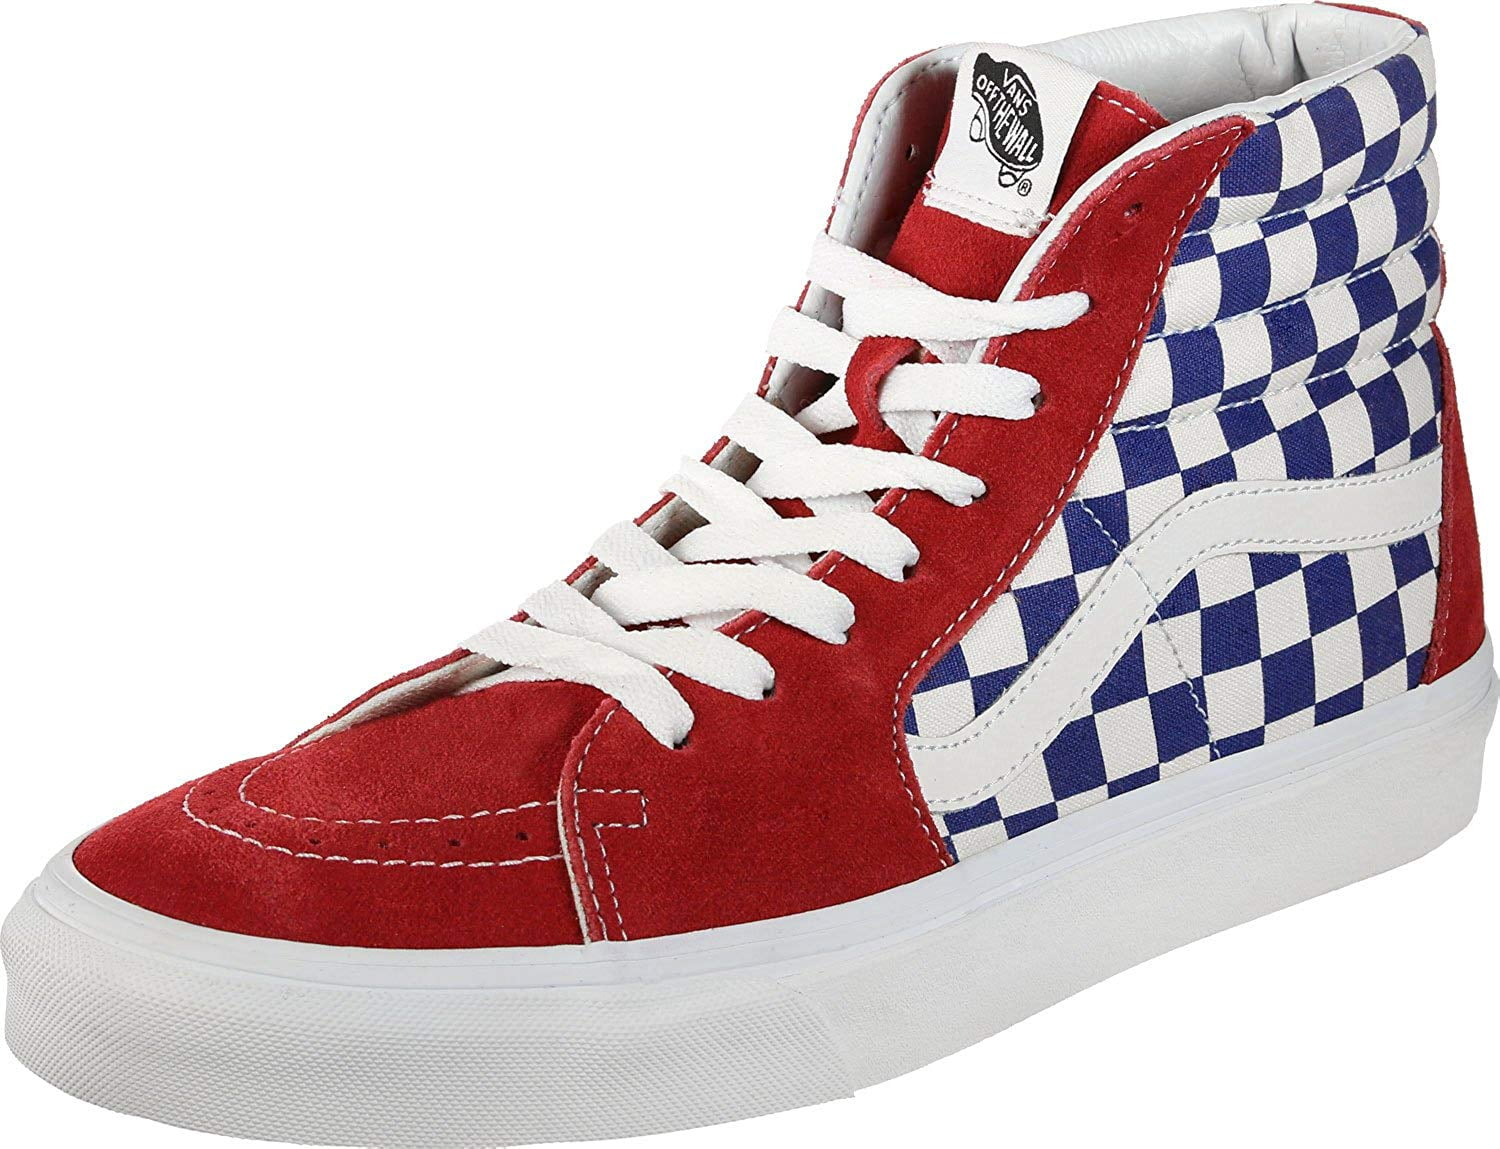 vans blue and red checkered